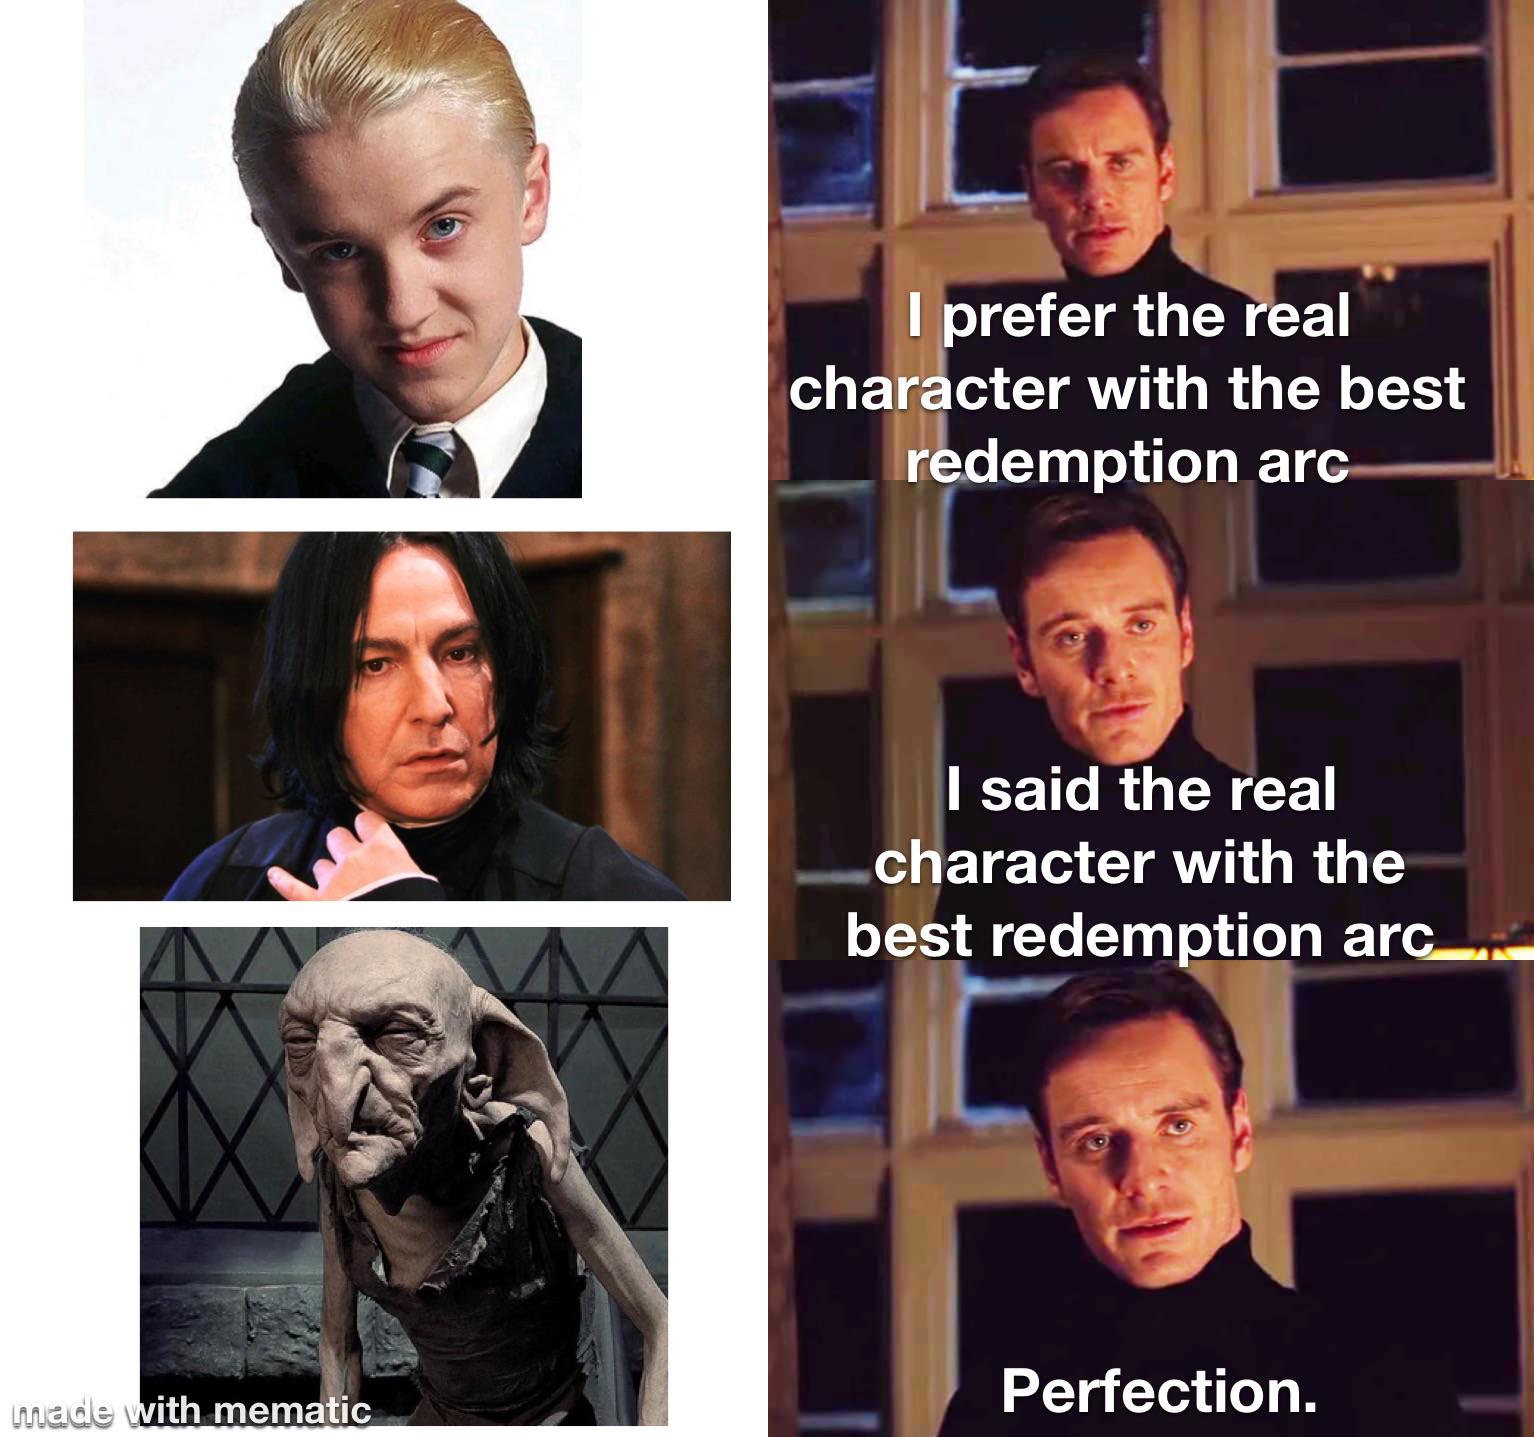 Which character in Harry Potter has the best redemption arc? 2